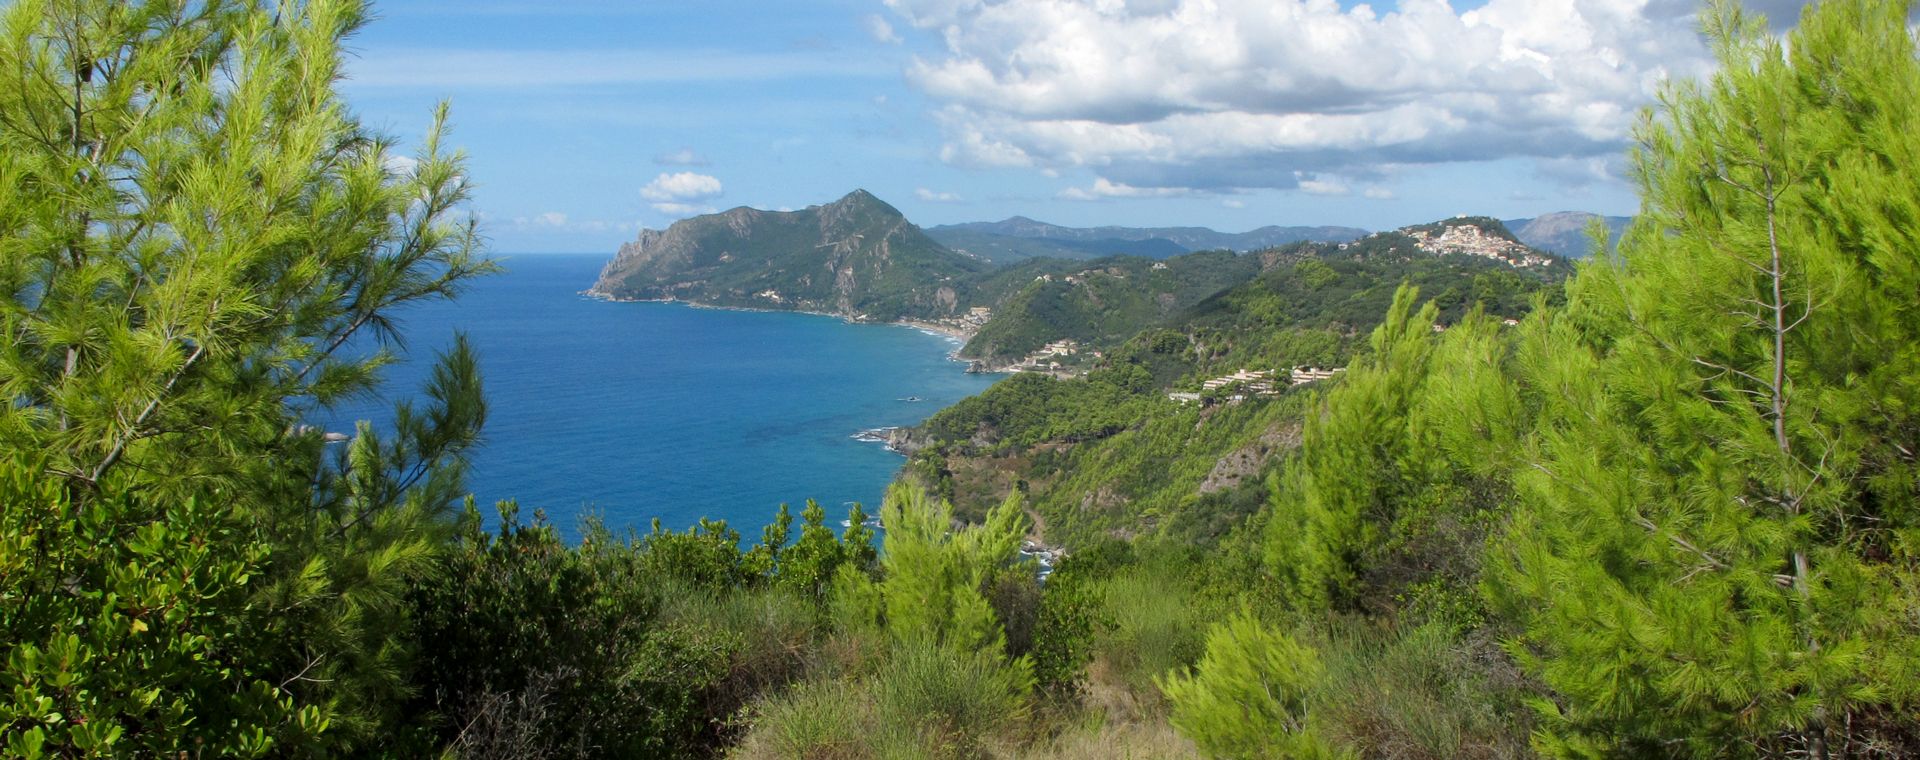 The west coast of Corfu with Mount Agios Georgios in the background